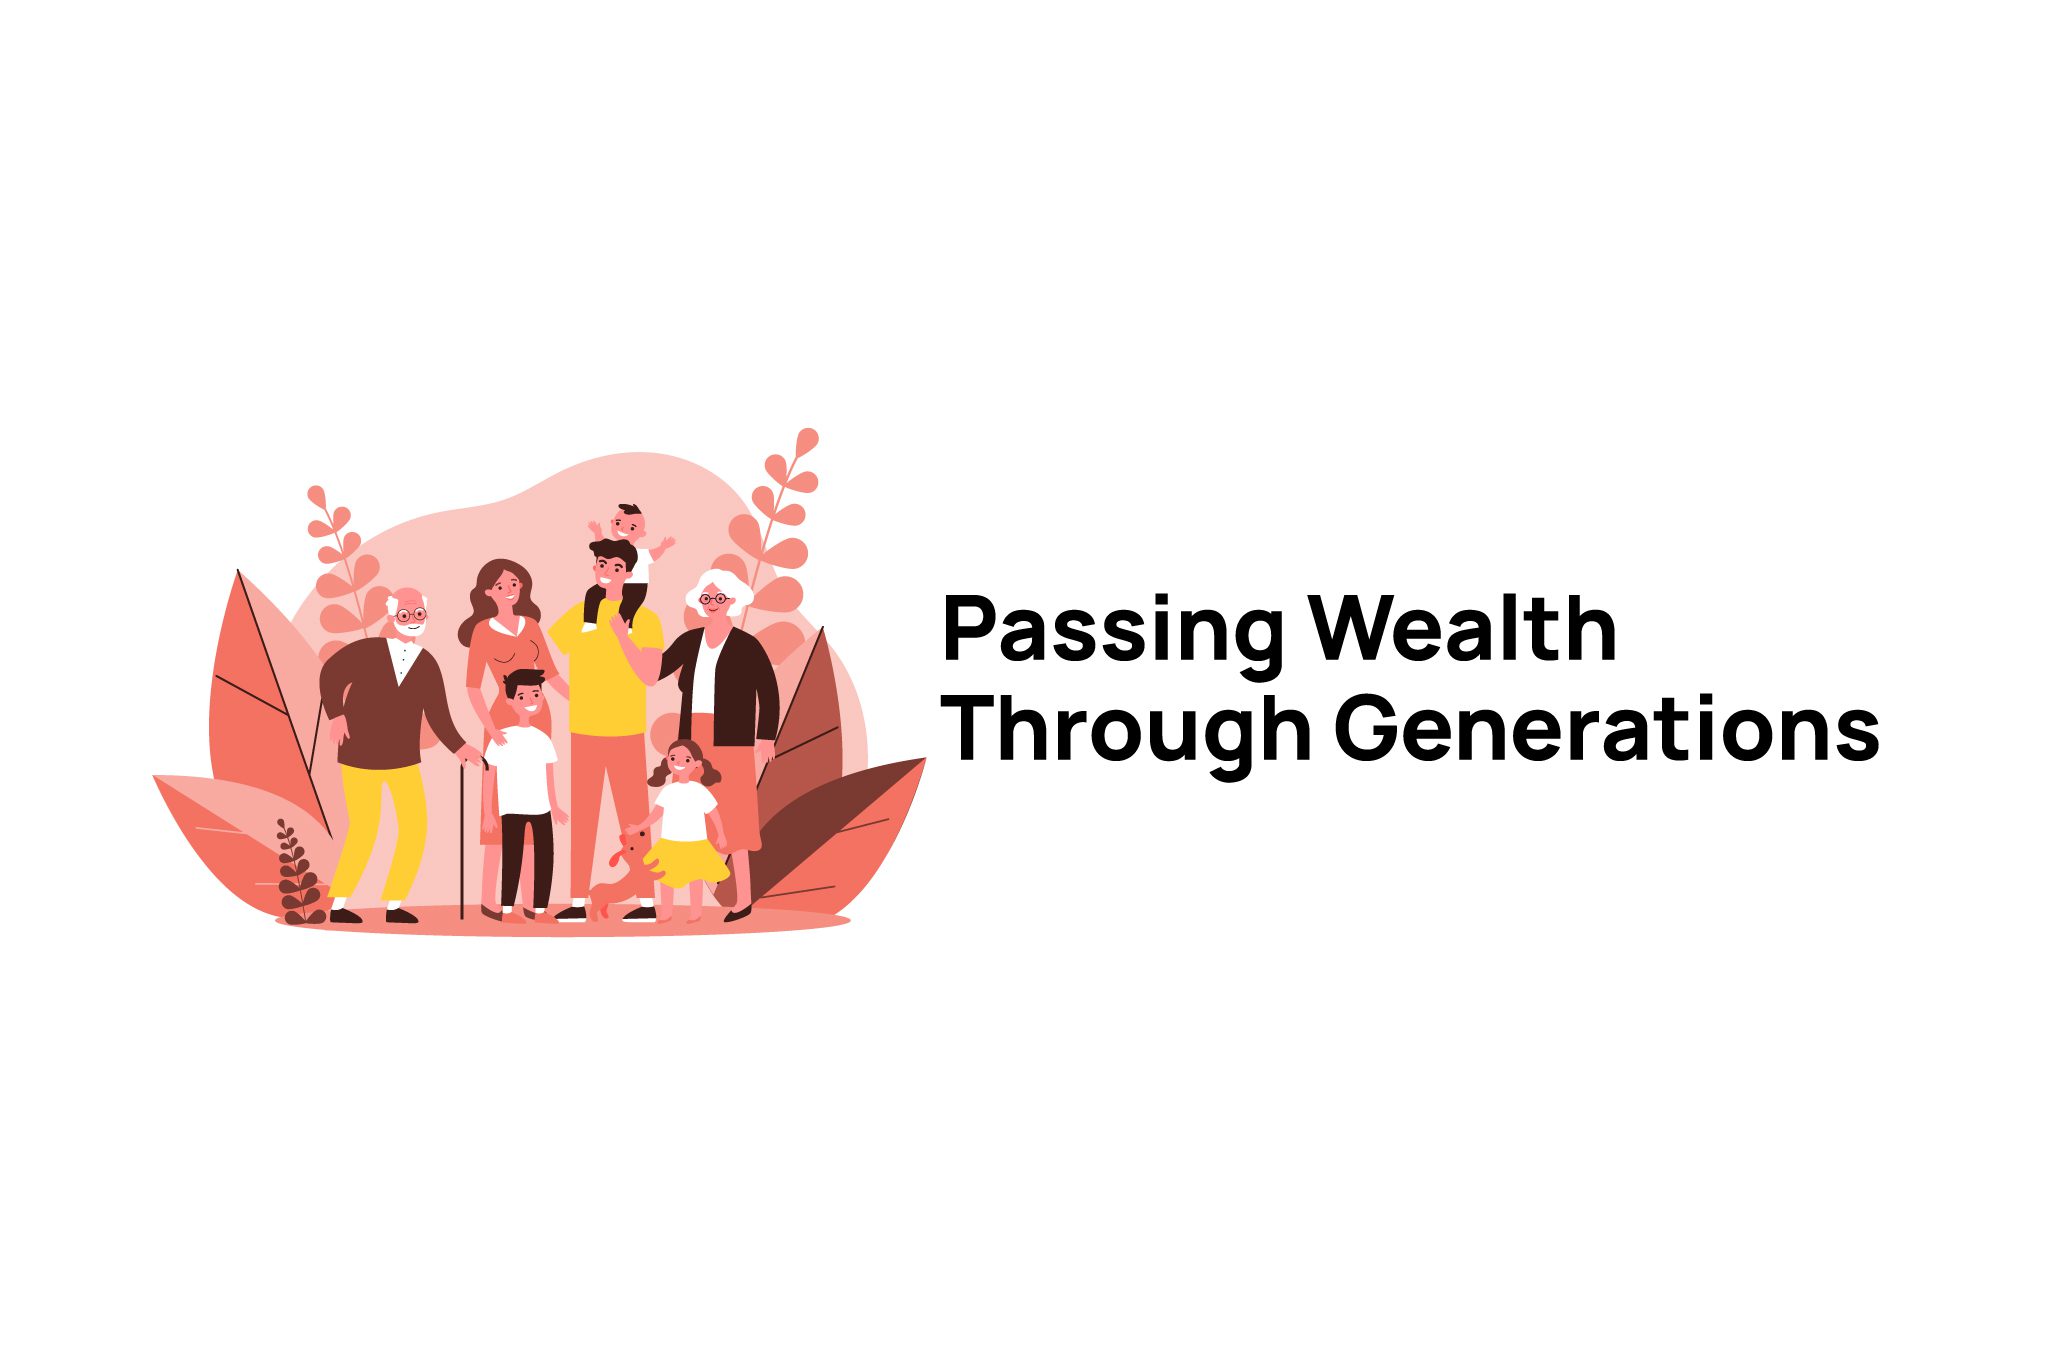 Passing wealth through generations